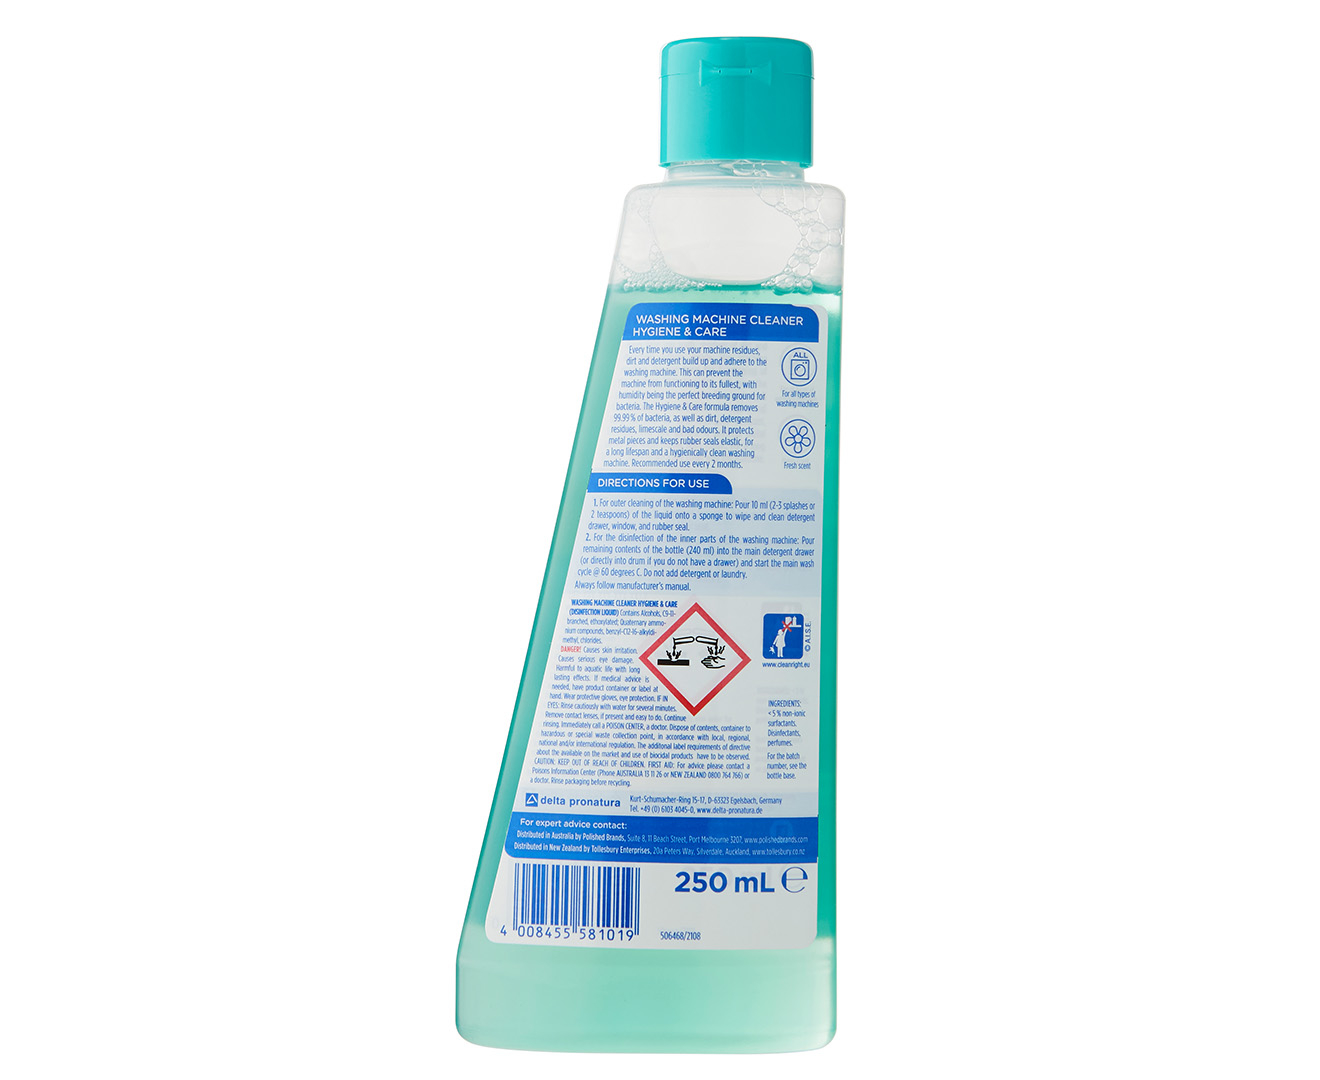 Dr Beckmann Service It Washing Machine Cleaner 250ml - Wilsons - Import,  distribution and wholesale of branded household, hardware and DIY products